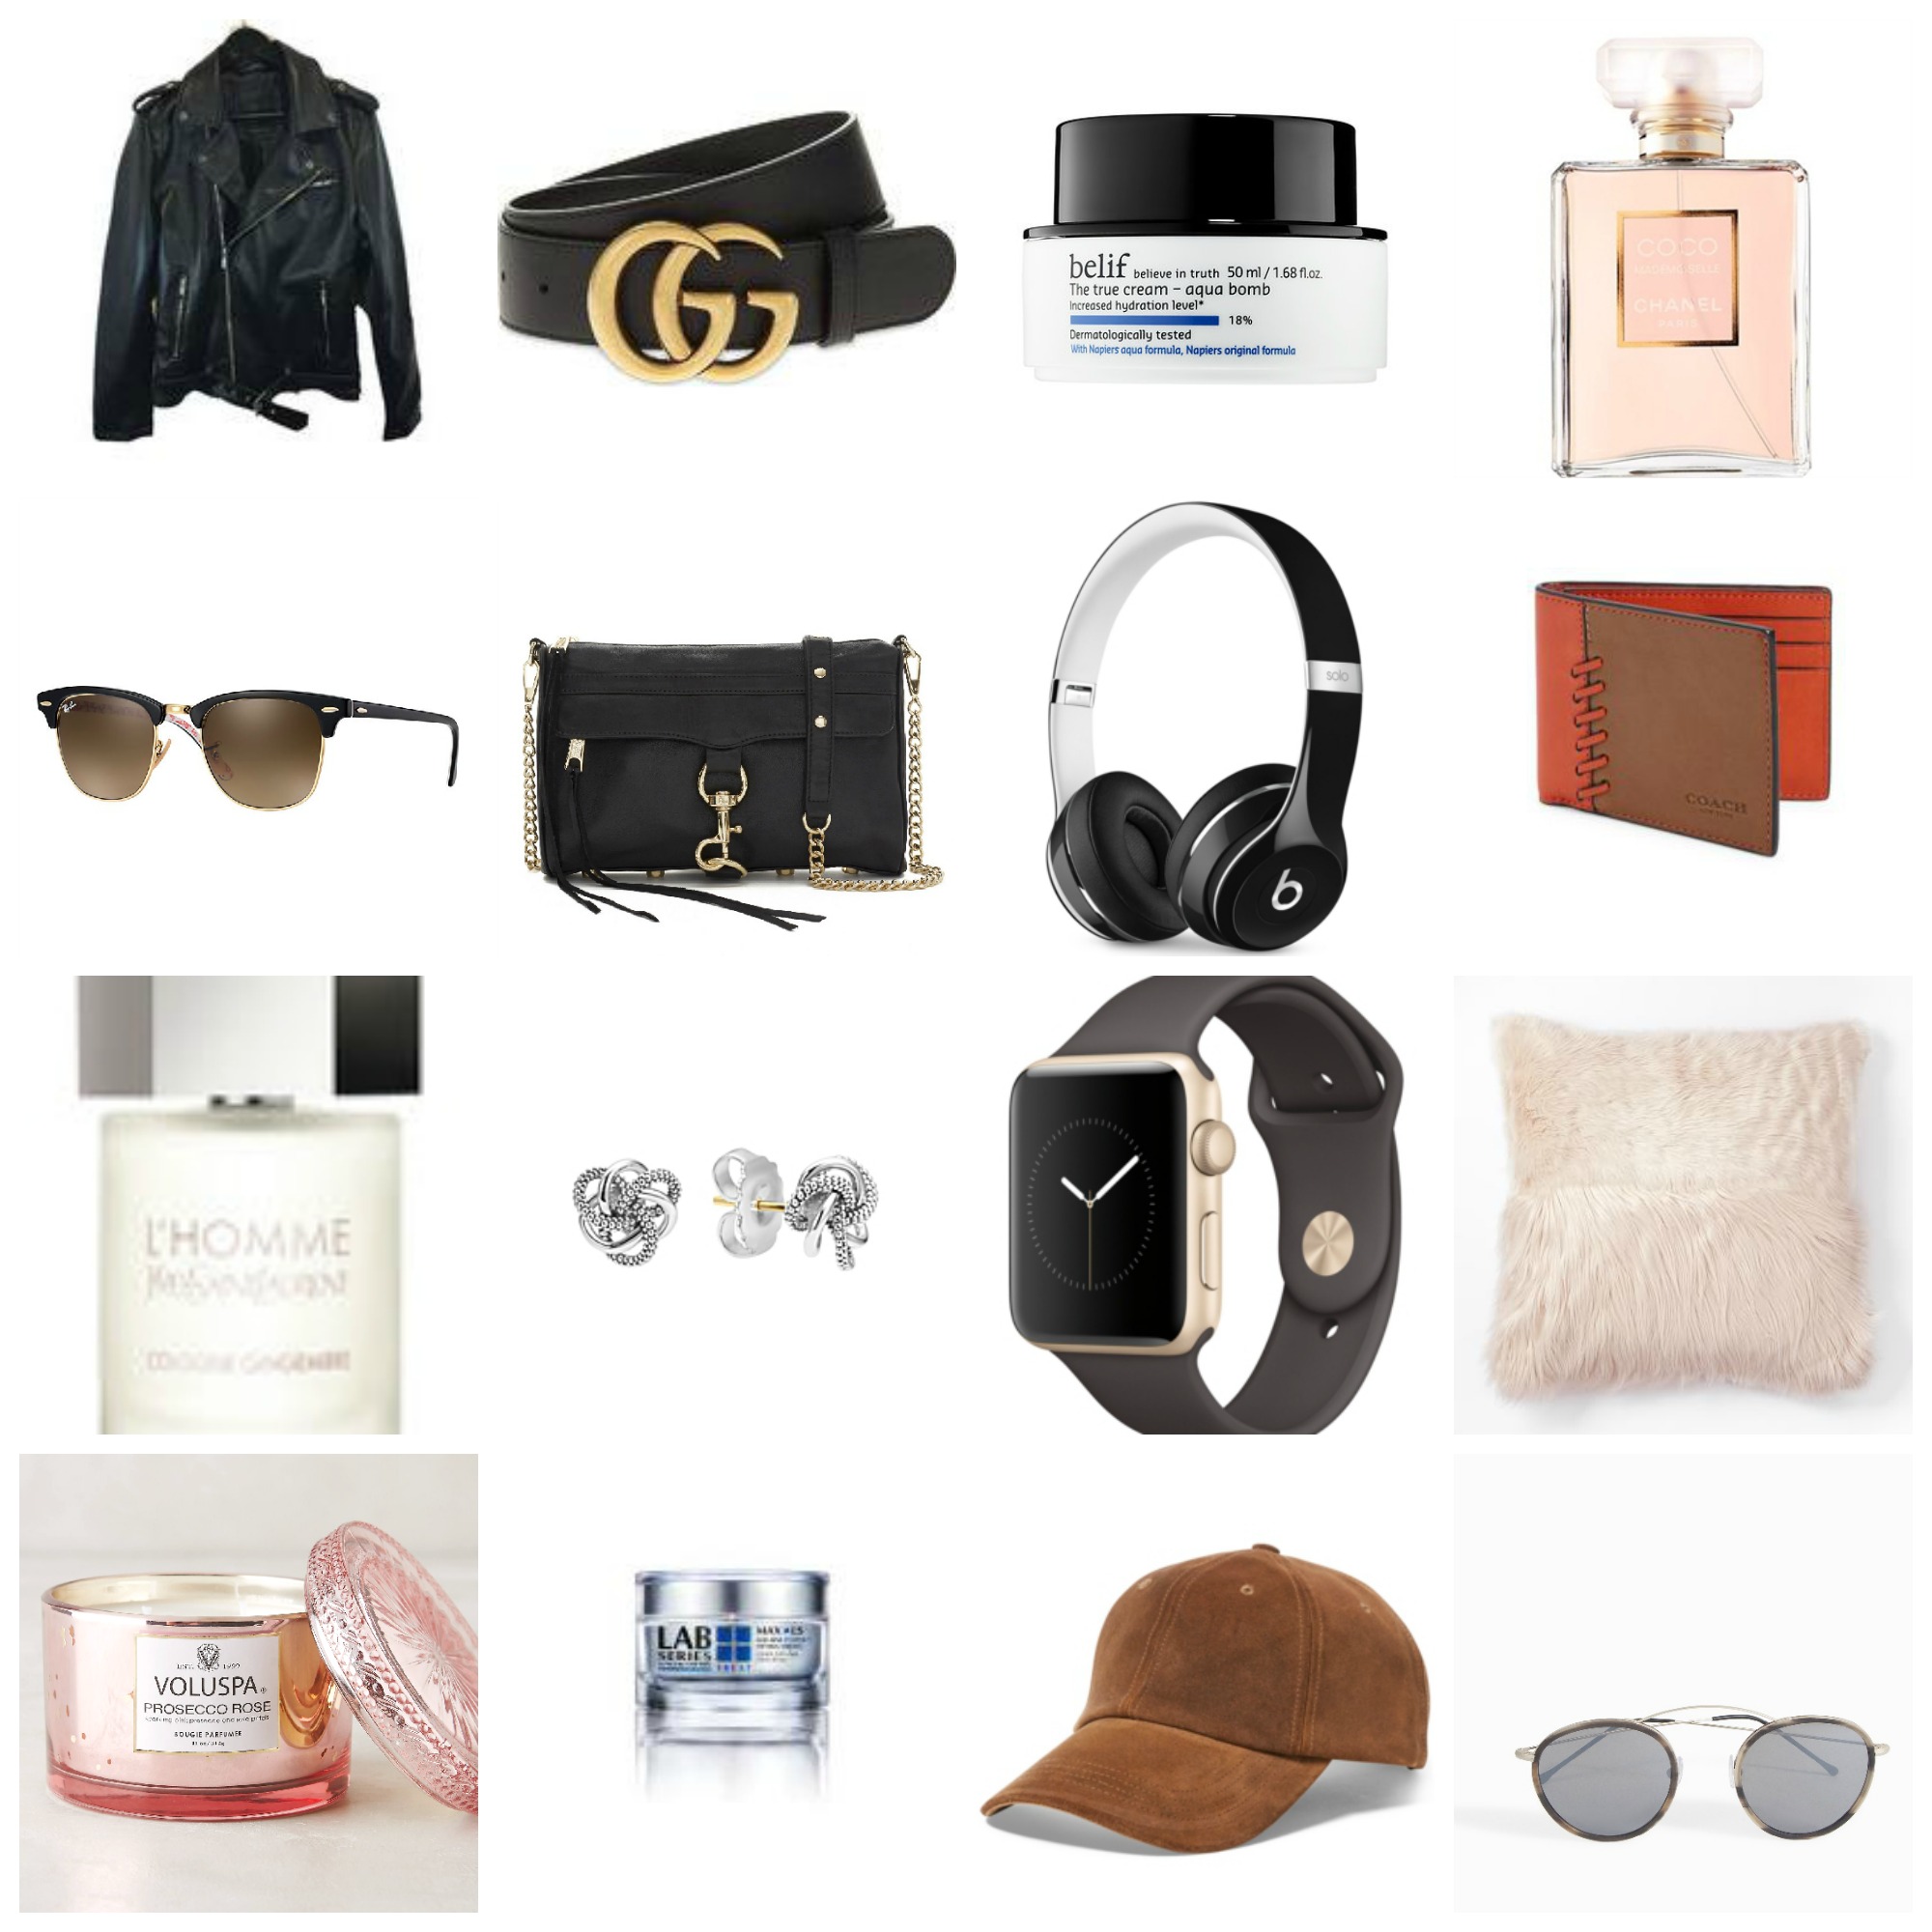 valentine's day gift guide